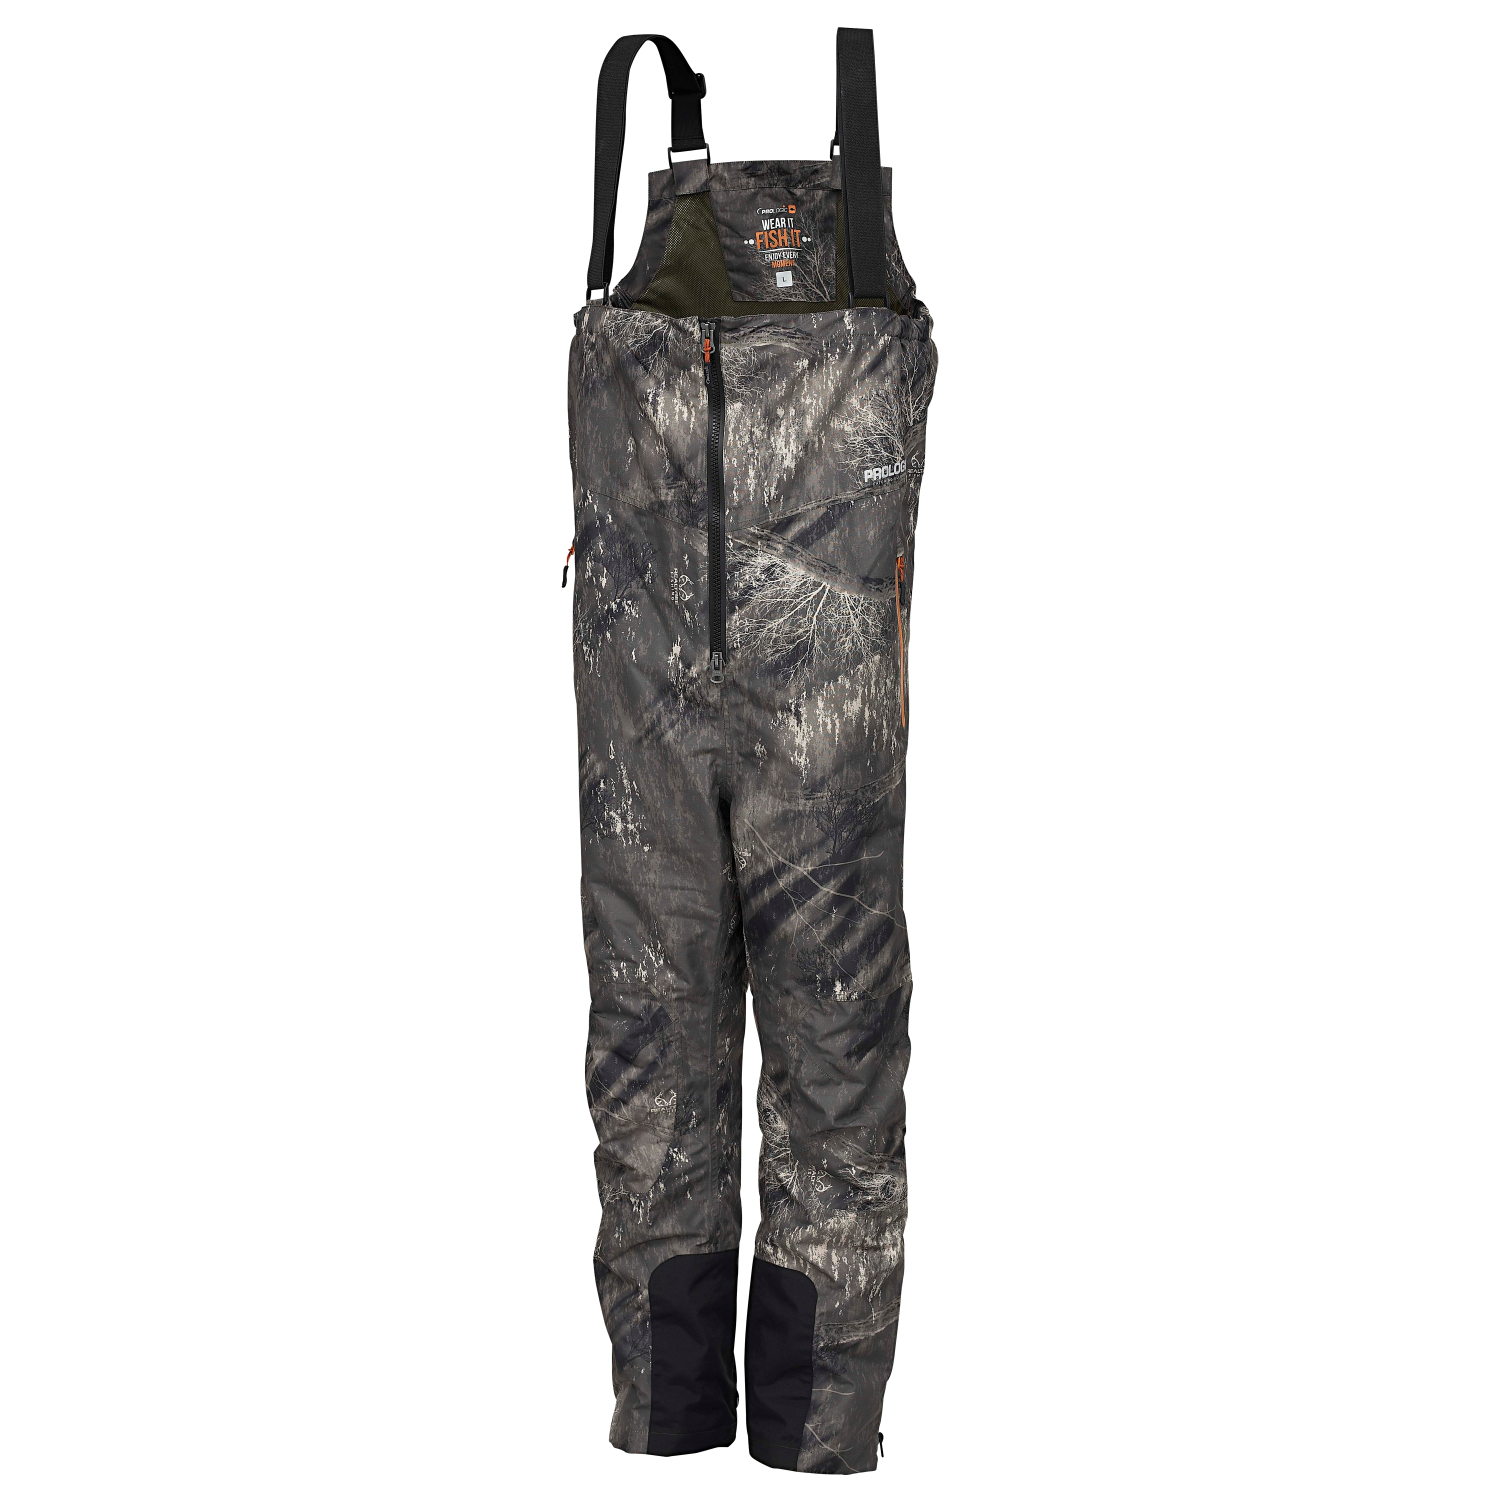 Prologic Mens Trousers Realtree Fishing B & B at low prices